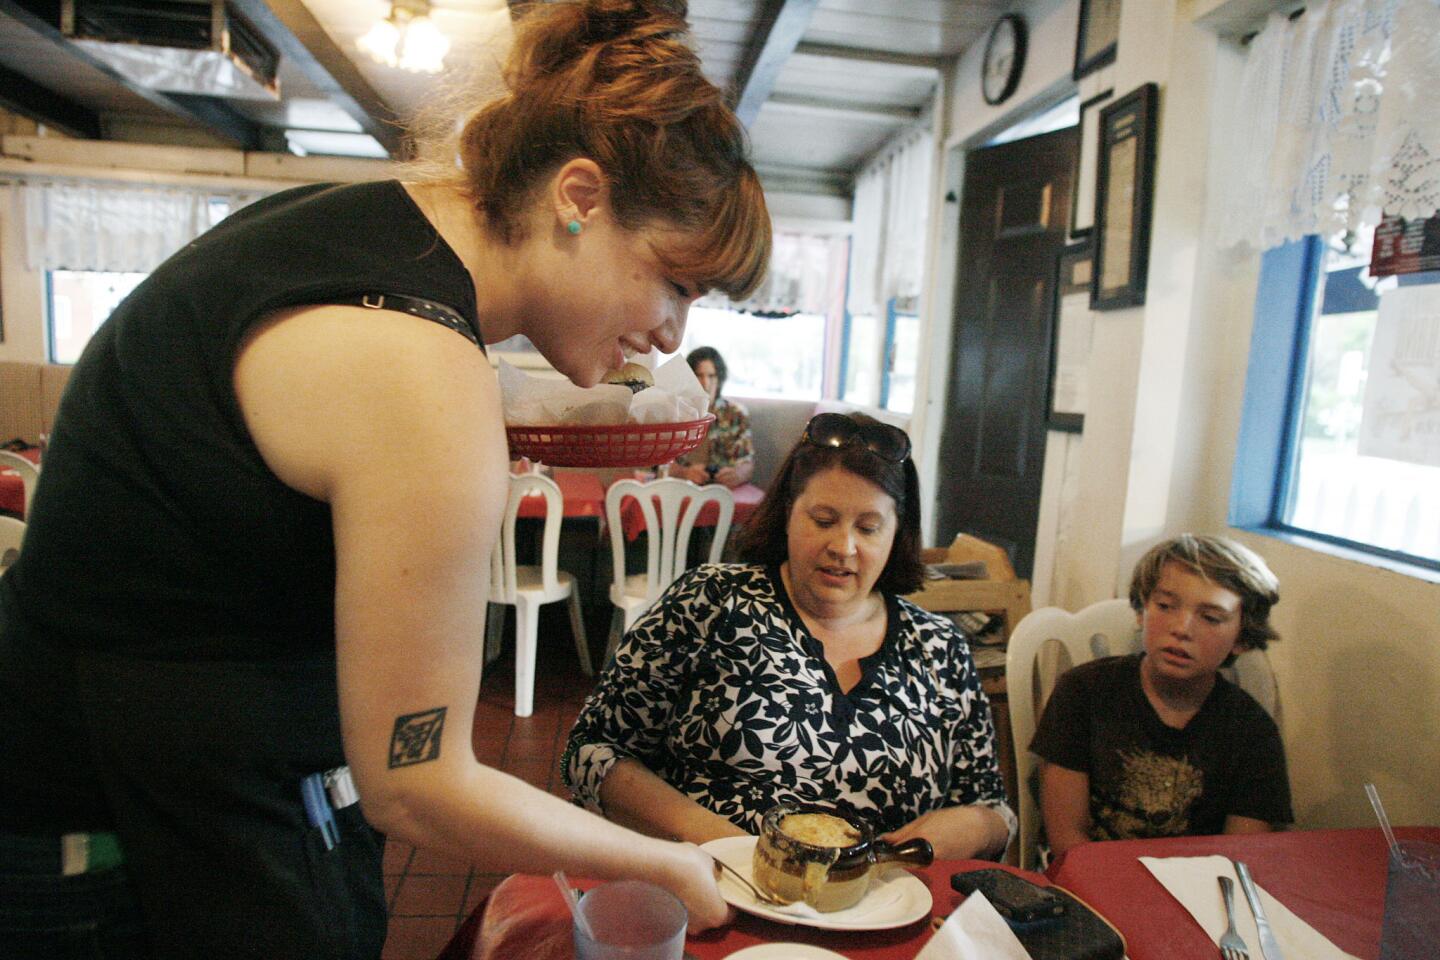 Waitress Katie Canavan, from left, servers her customers Stephanie Patterson and her son, Griffin Kazanegras, 11, at Riverside Cafe in Burbank on Wednesday, August 22, 2012.